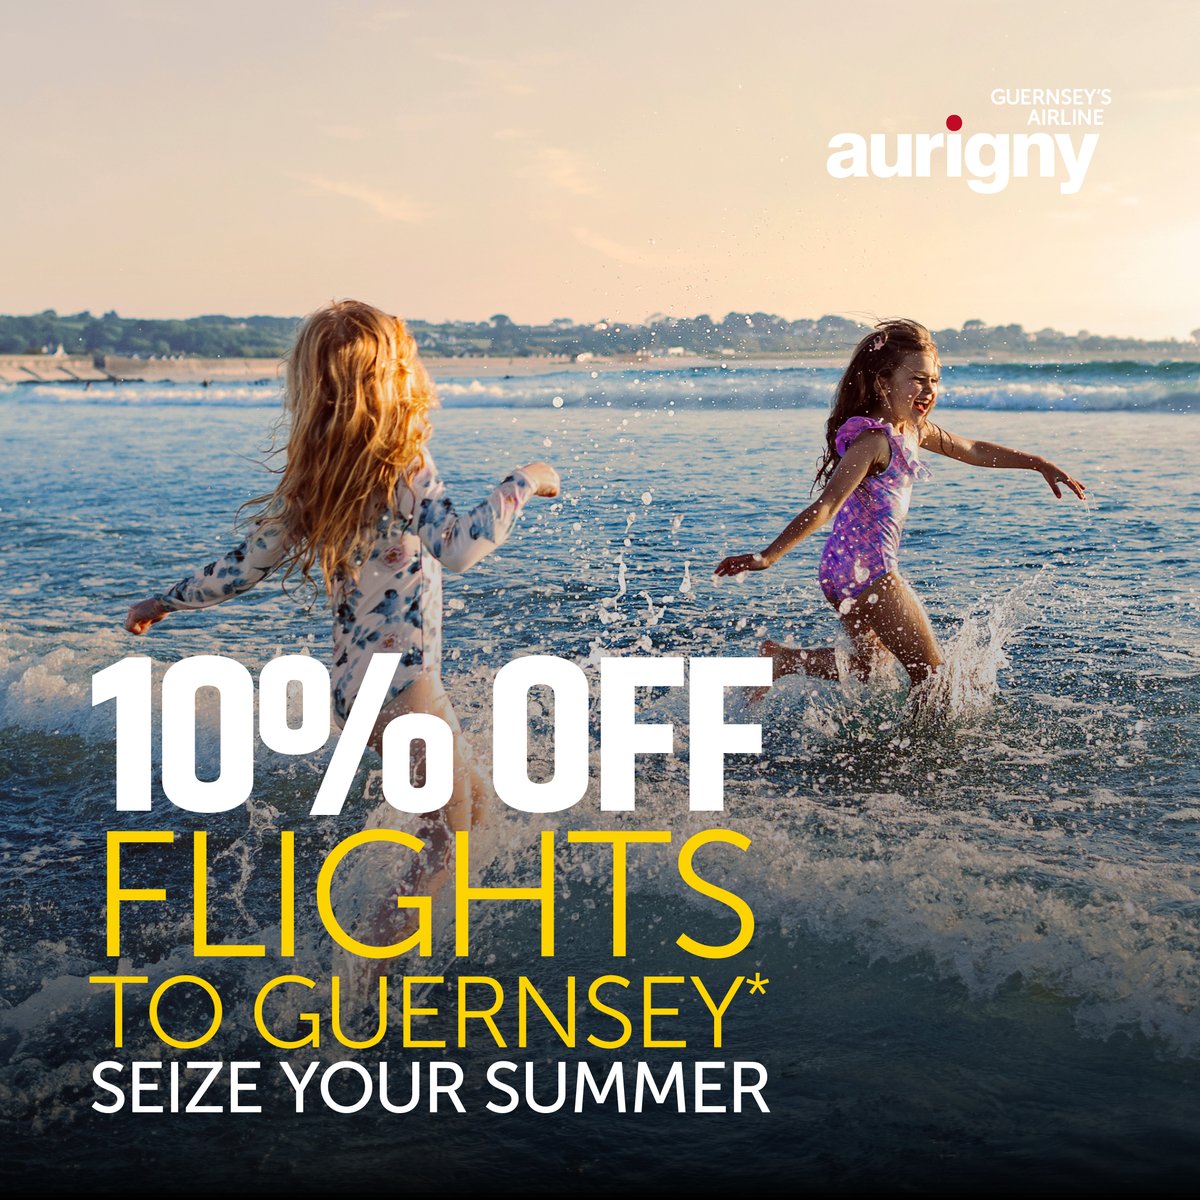 Get 10% off flights to Guernsey with Aurigny using their promo code SAVE10* for travel between 15 April - 15 July 2024. Seize your summer and book now at aurigny.com *Sale ends 18.04.2024. Subject to availability. T&Cs apply, see website for details.